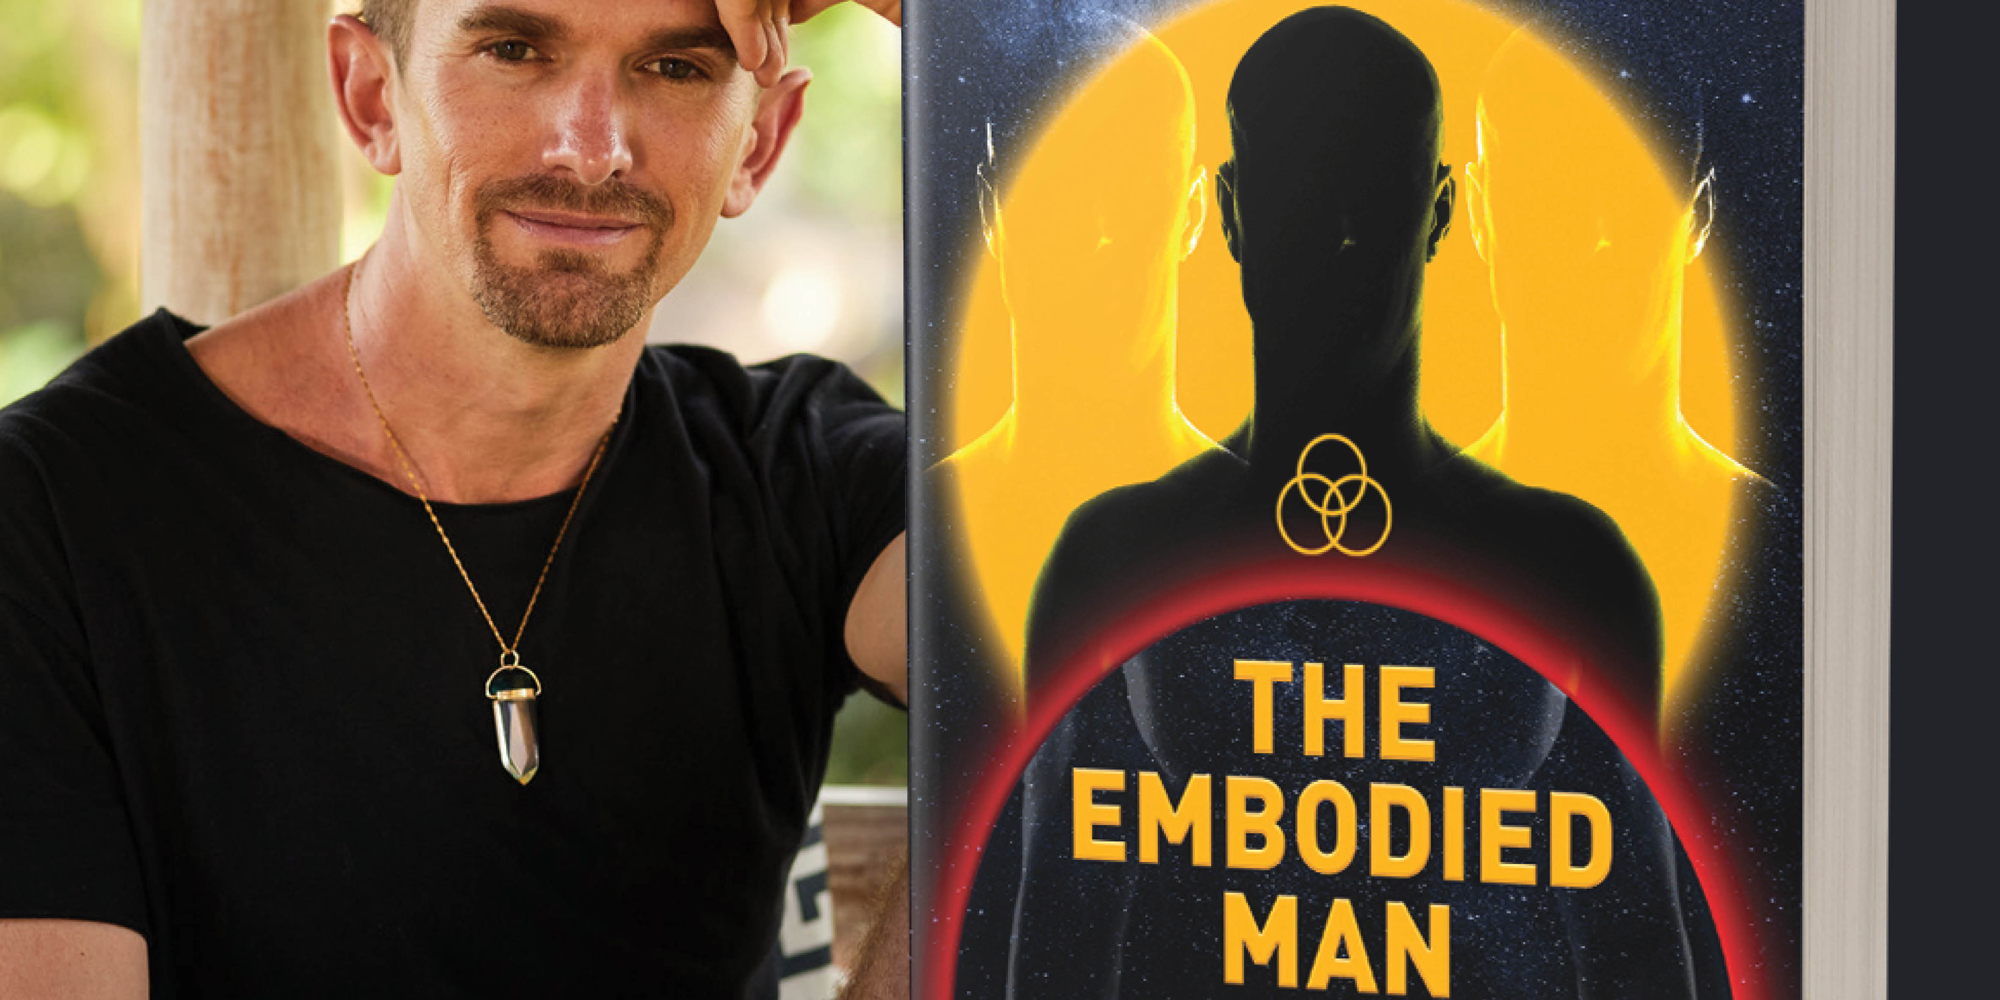 The Embodied Man Book Talk